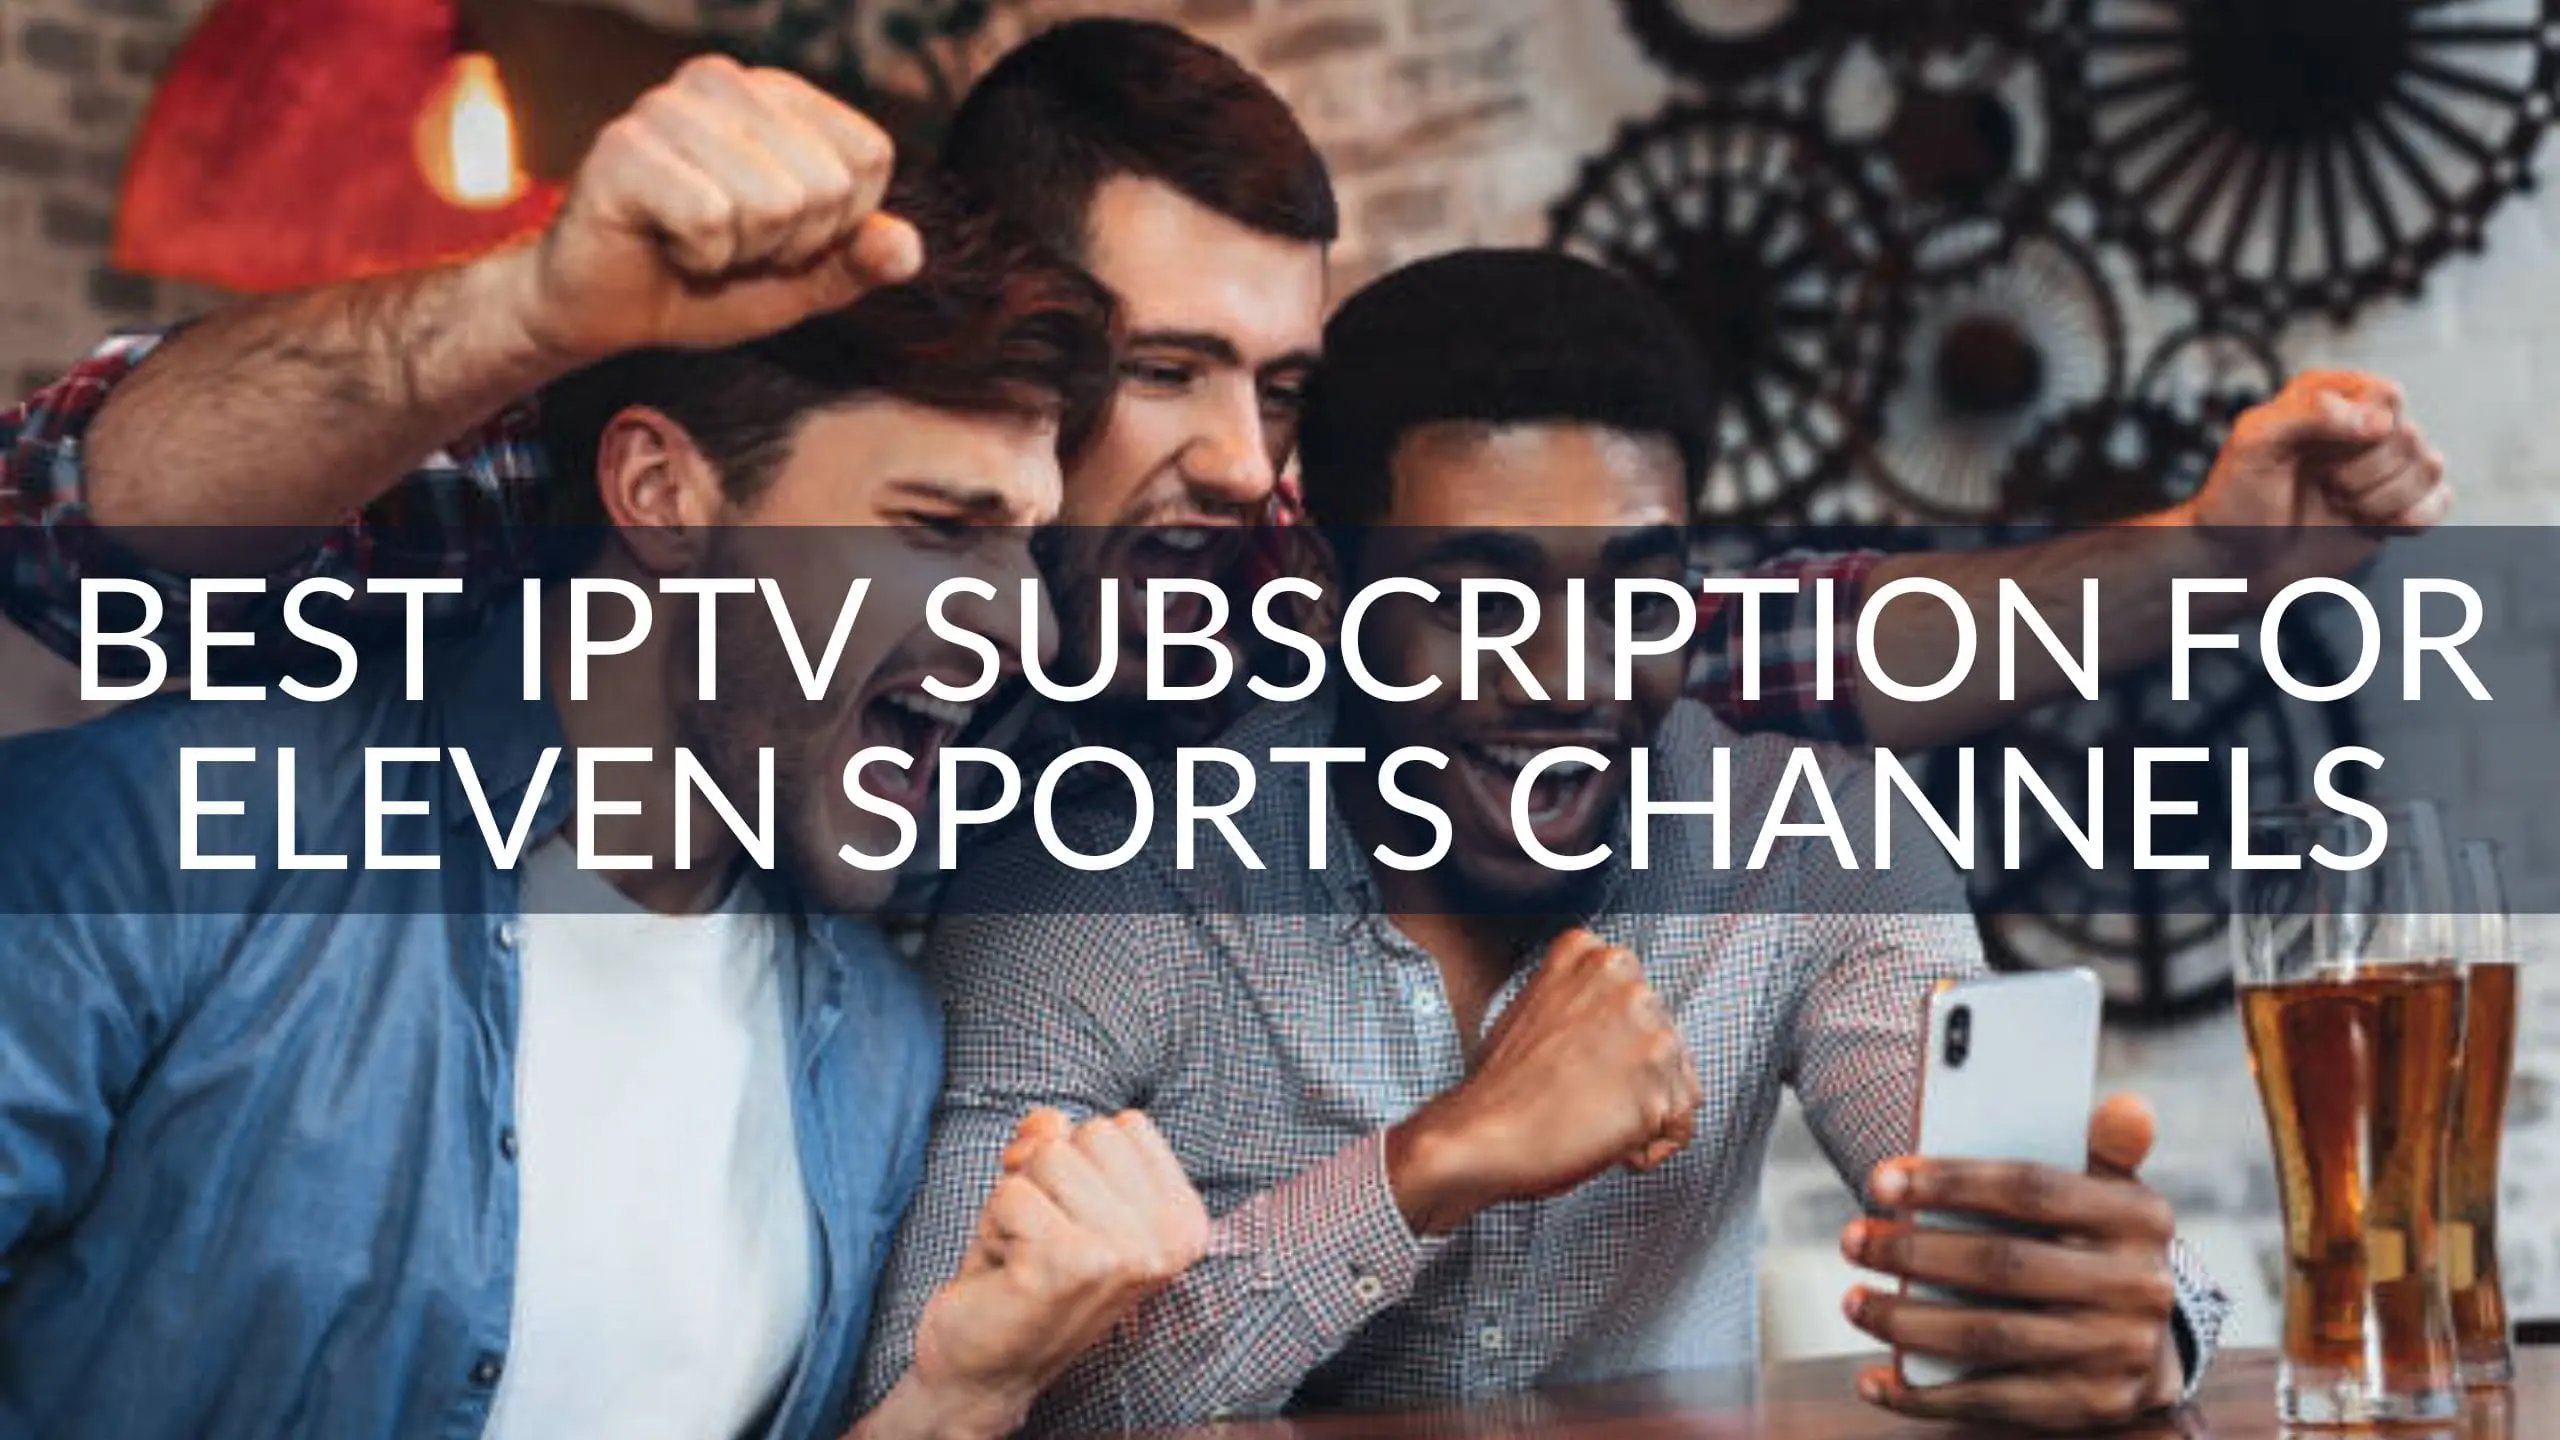 Best IPTV Subscription for ELEVEN SPORTS Channels